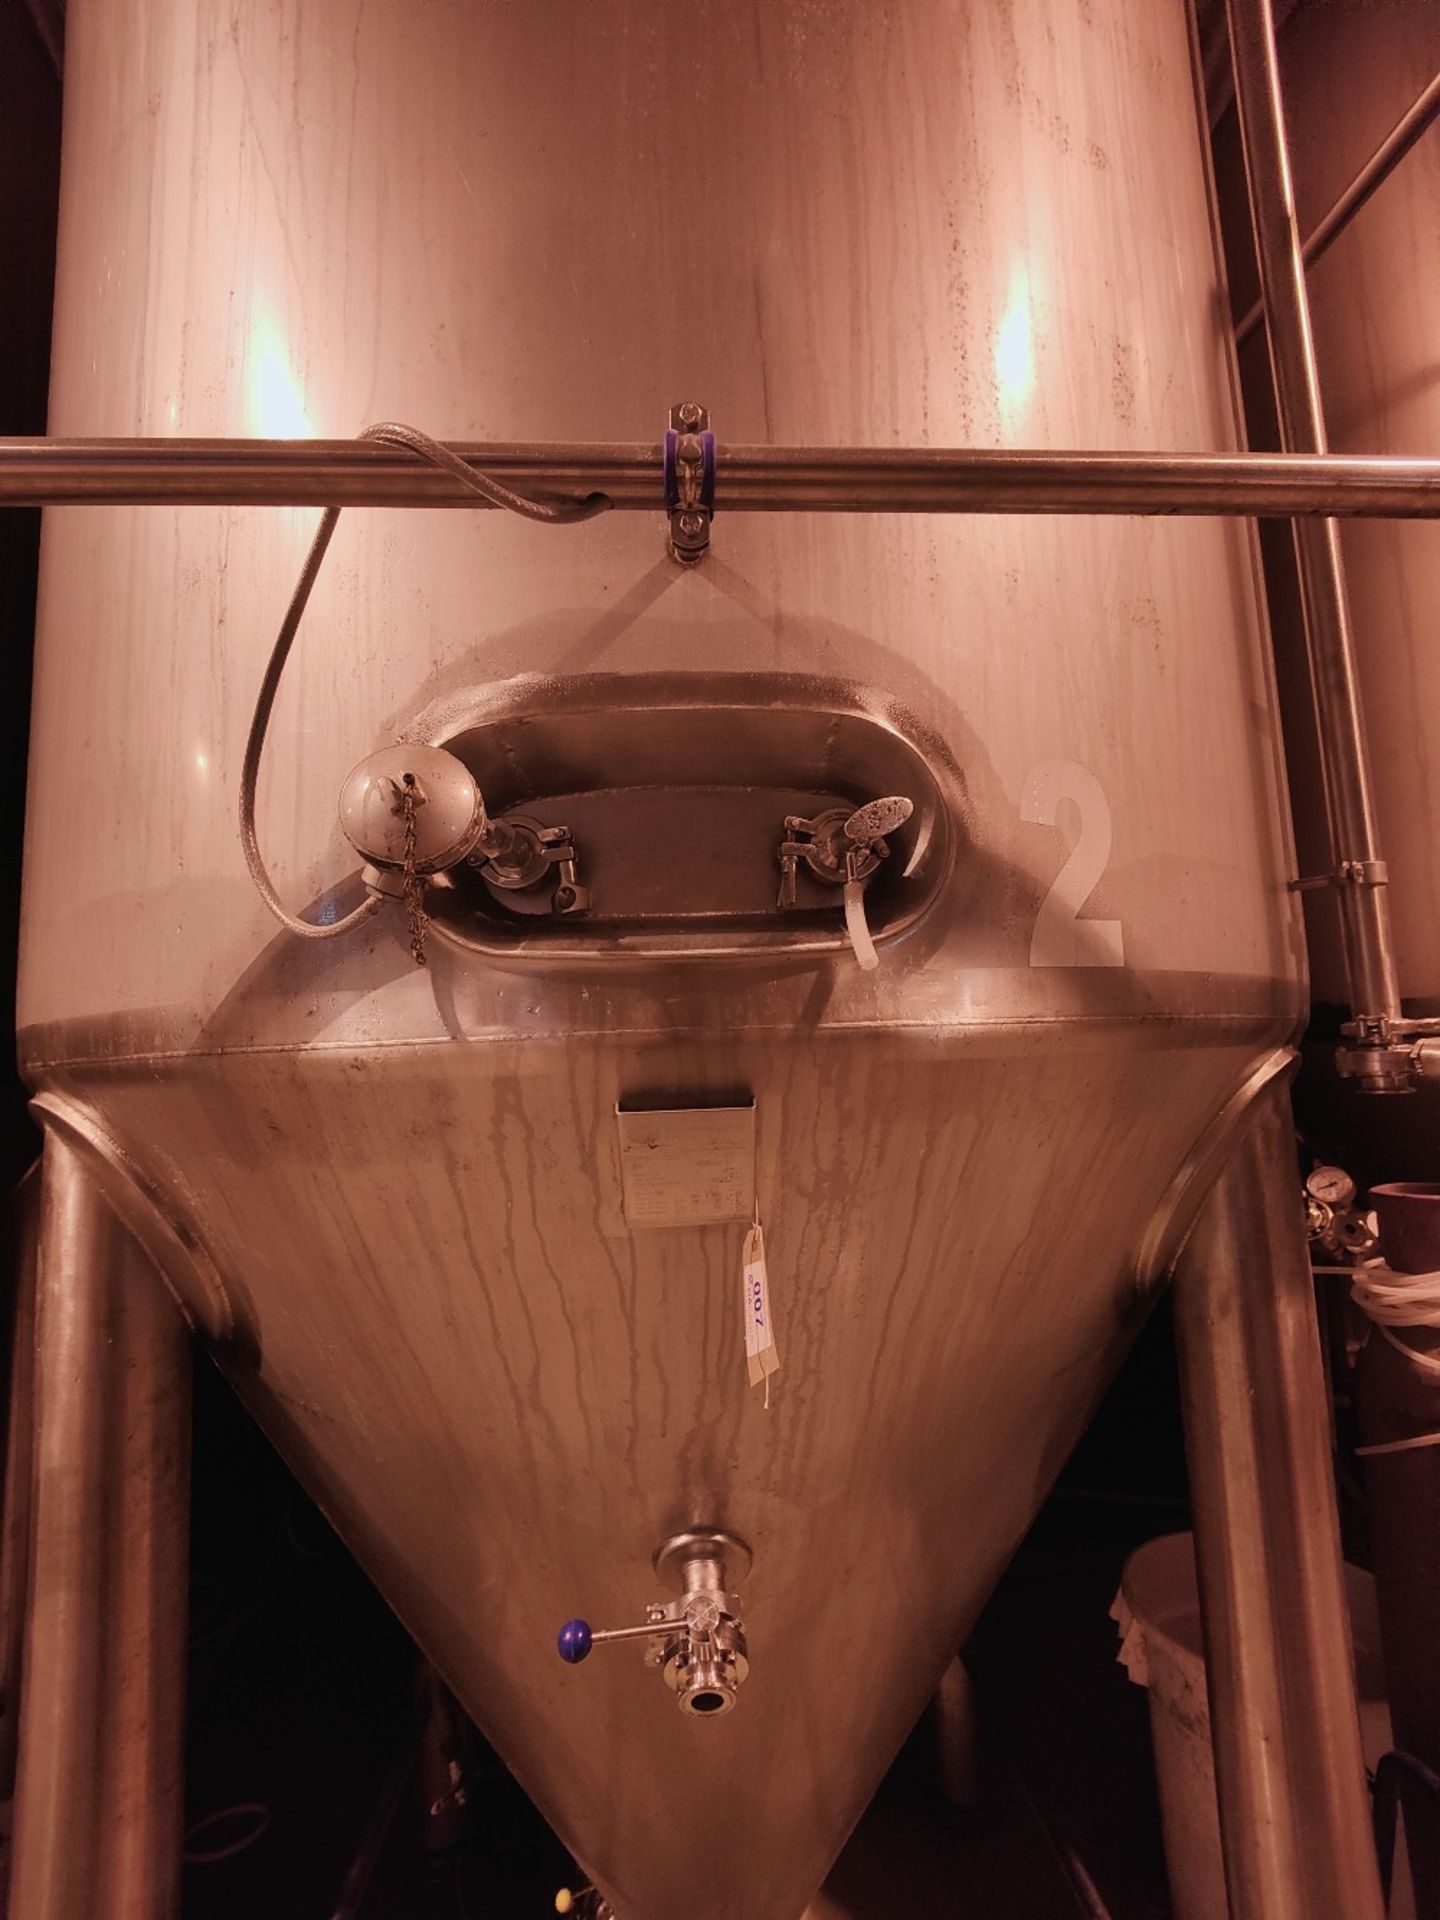 (2014) Biomashinostroene Ad, Bulgaria 6690 Litre Stainless Steel Fermentation Tank With Conical Base - Image 3 of 5